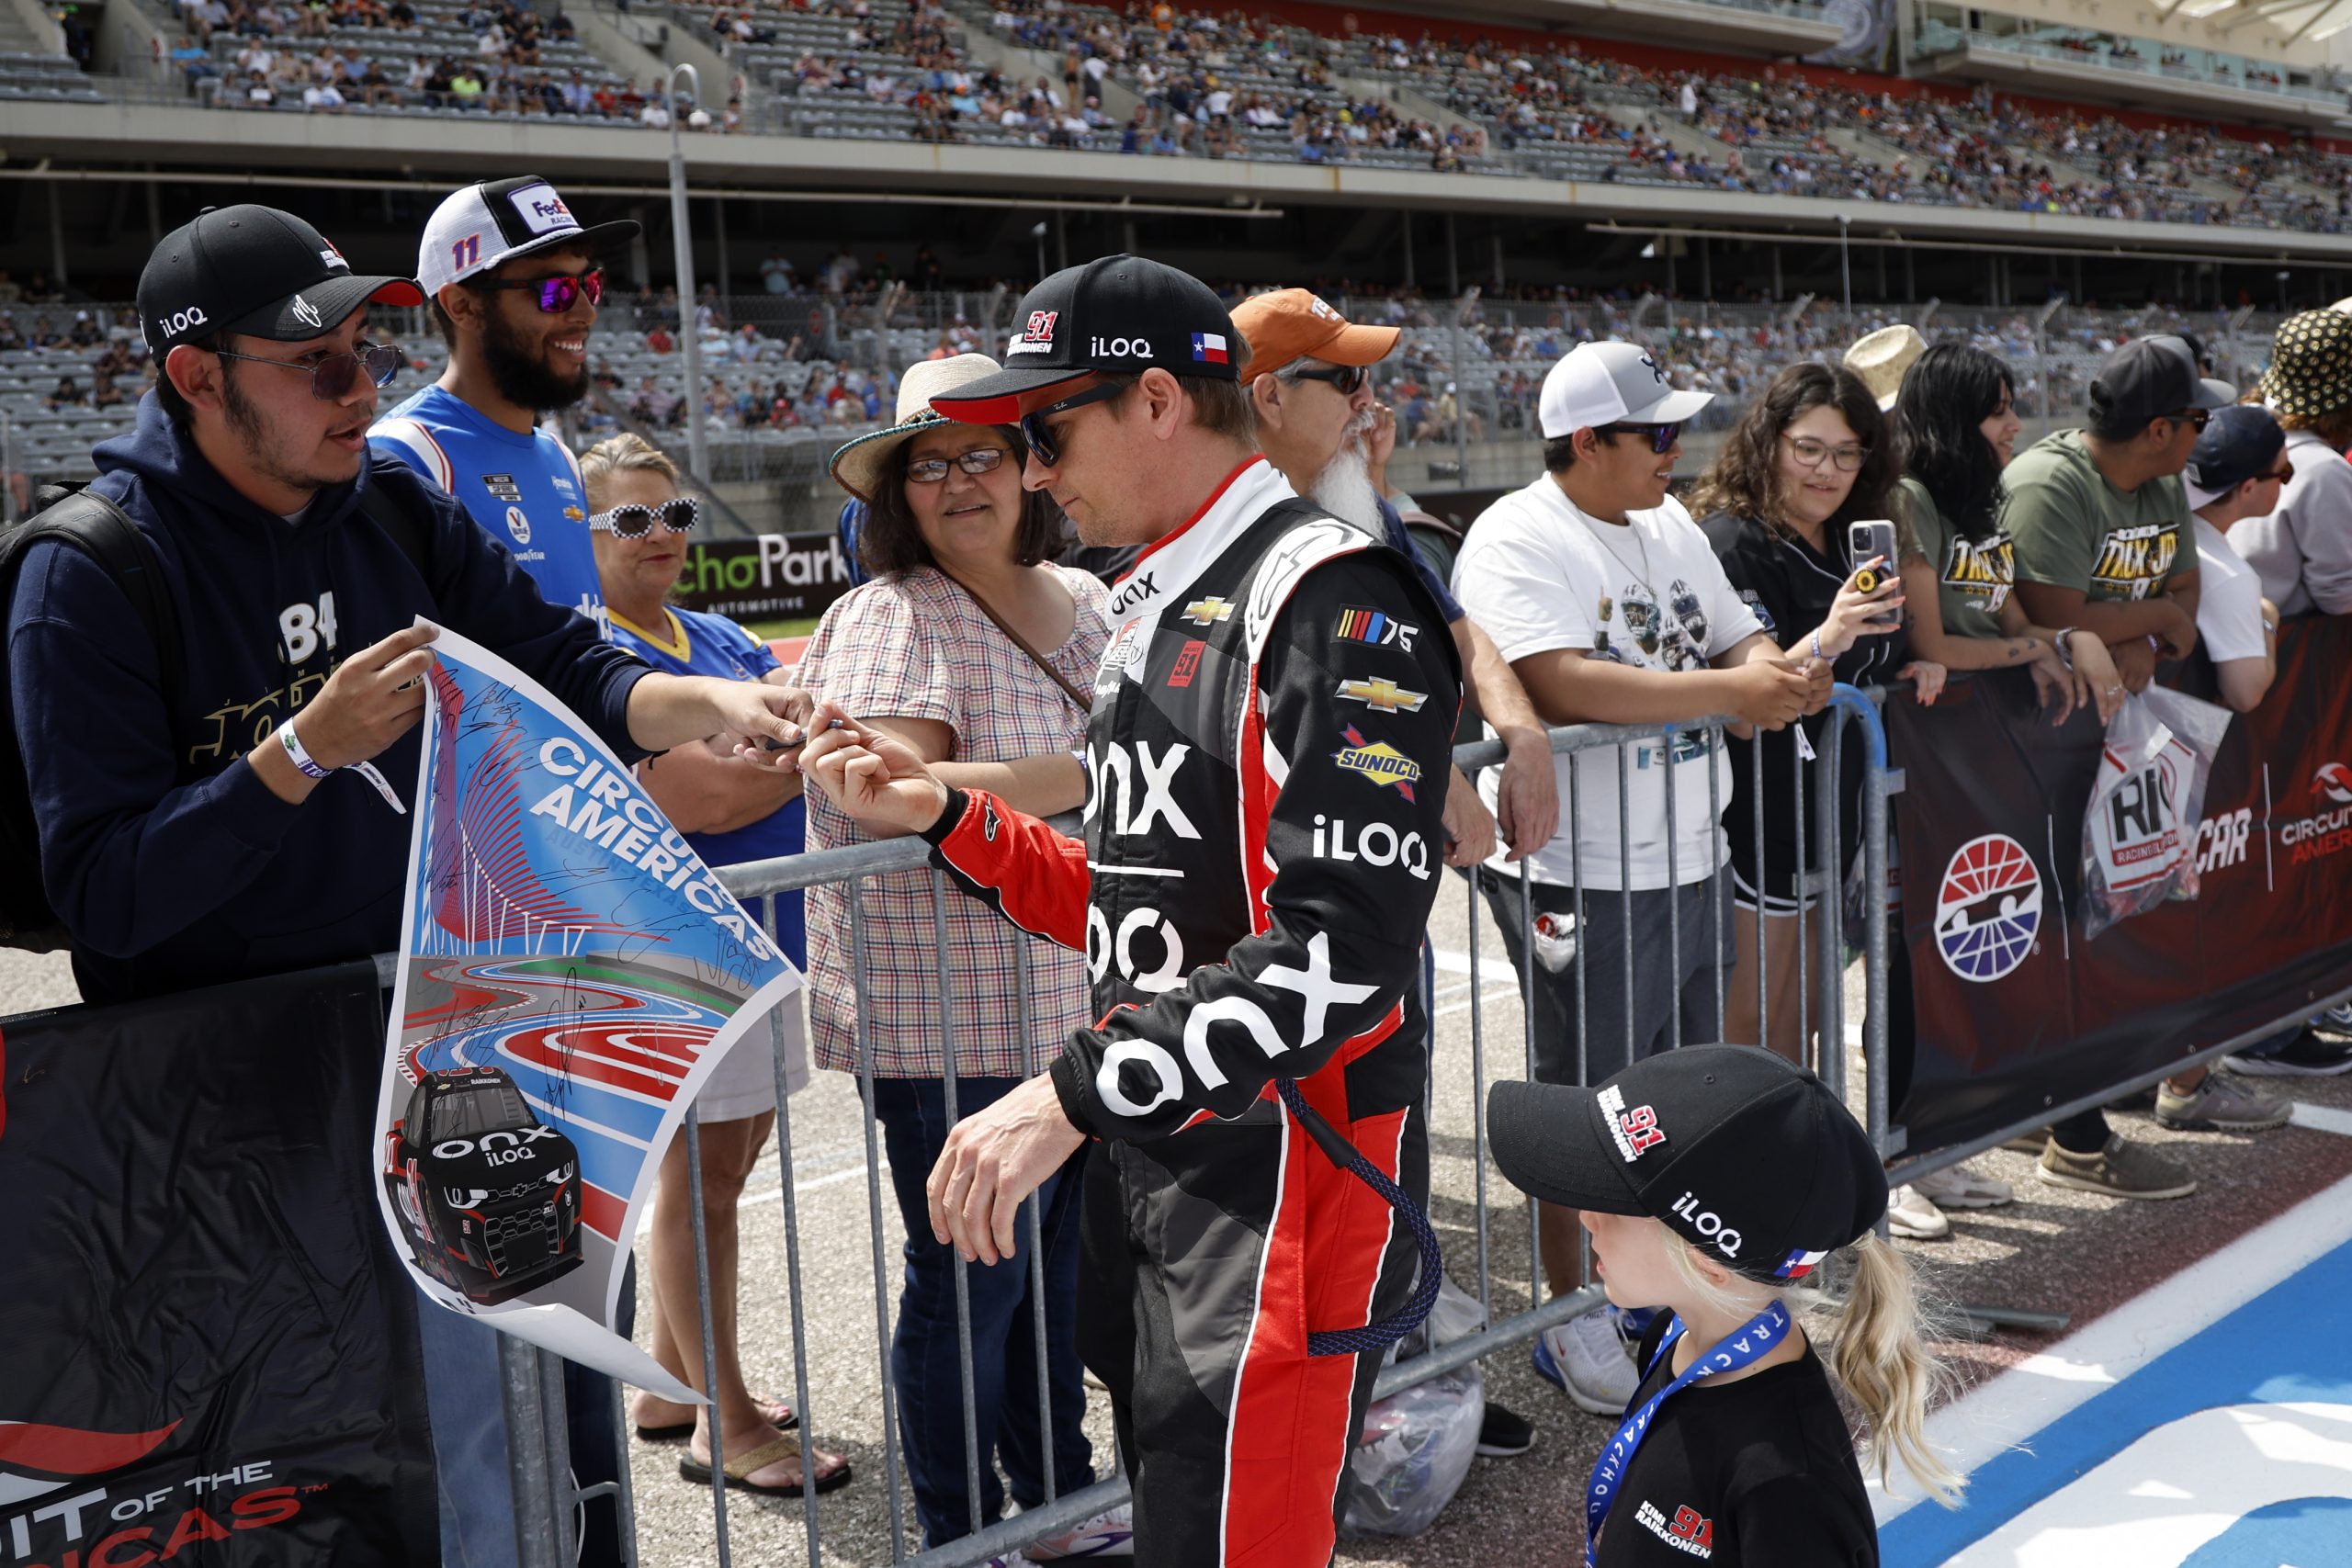 AUSTIN, TEXAS - MARCH 26: Kimi Raikkonen, driver of the #91 Onx Homes/iLOQ Chevrolet, signs an autograph for a NASCAR fan prior to the NASCAR Cup Series EchoPark Automotive Grand Prix at Circuit of The Americas on March 26, 2023 in Austin, Texas. (Photo by Chris Graythen/Getty Images)